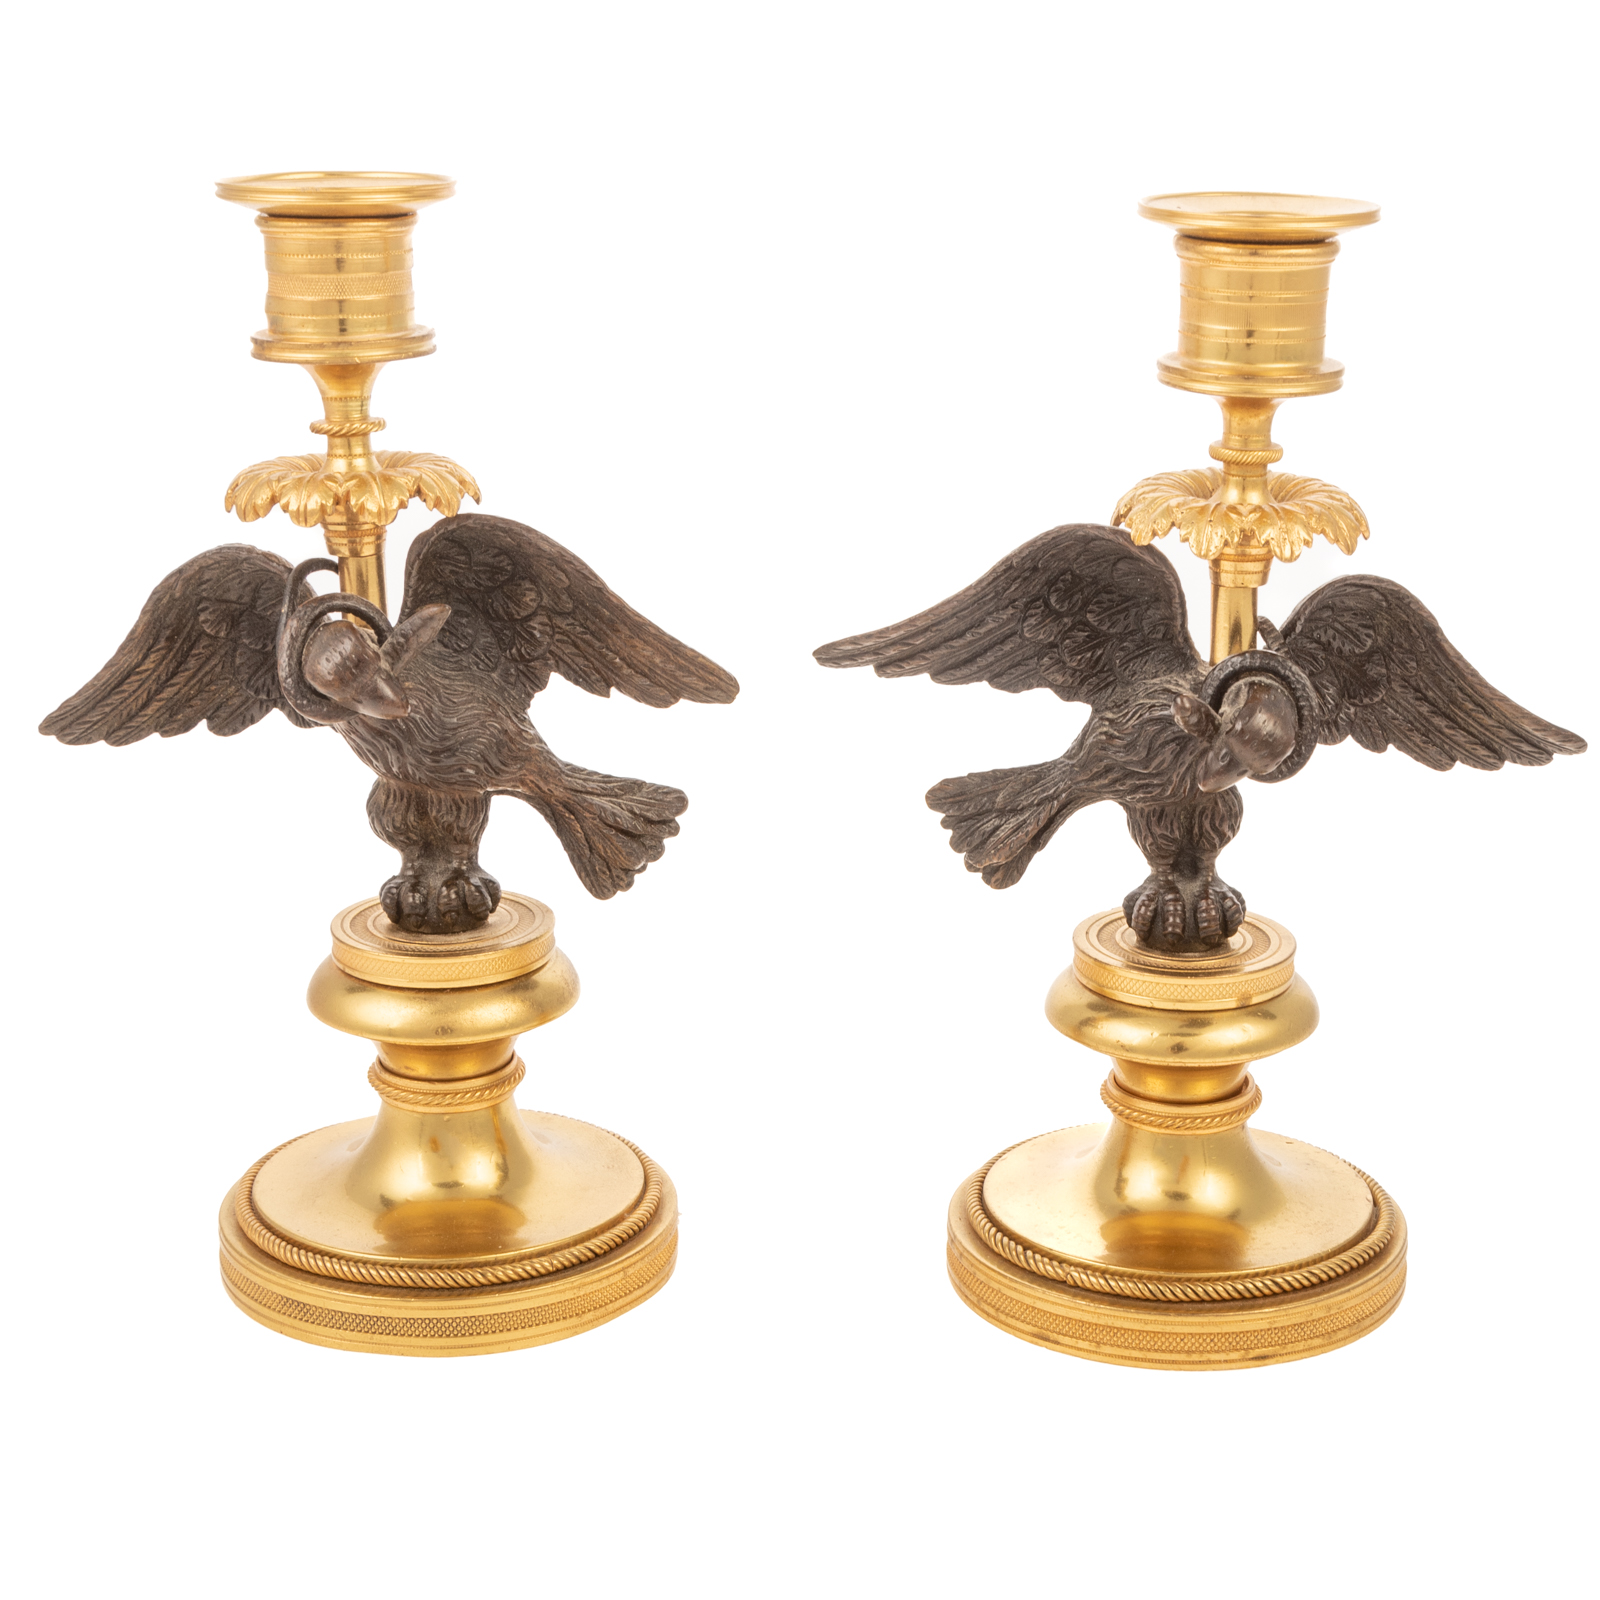 A PAIR OF FRENCH EMPIRE STYLE FIGURAL